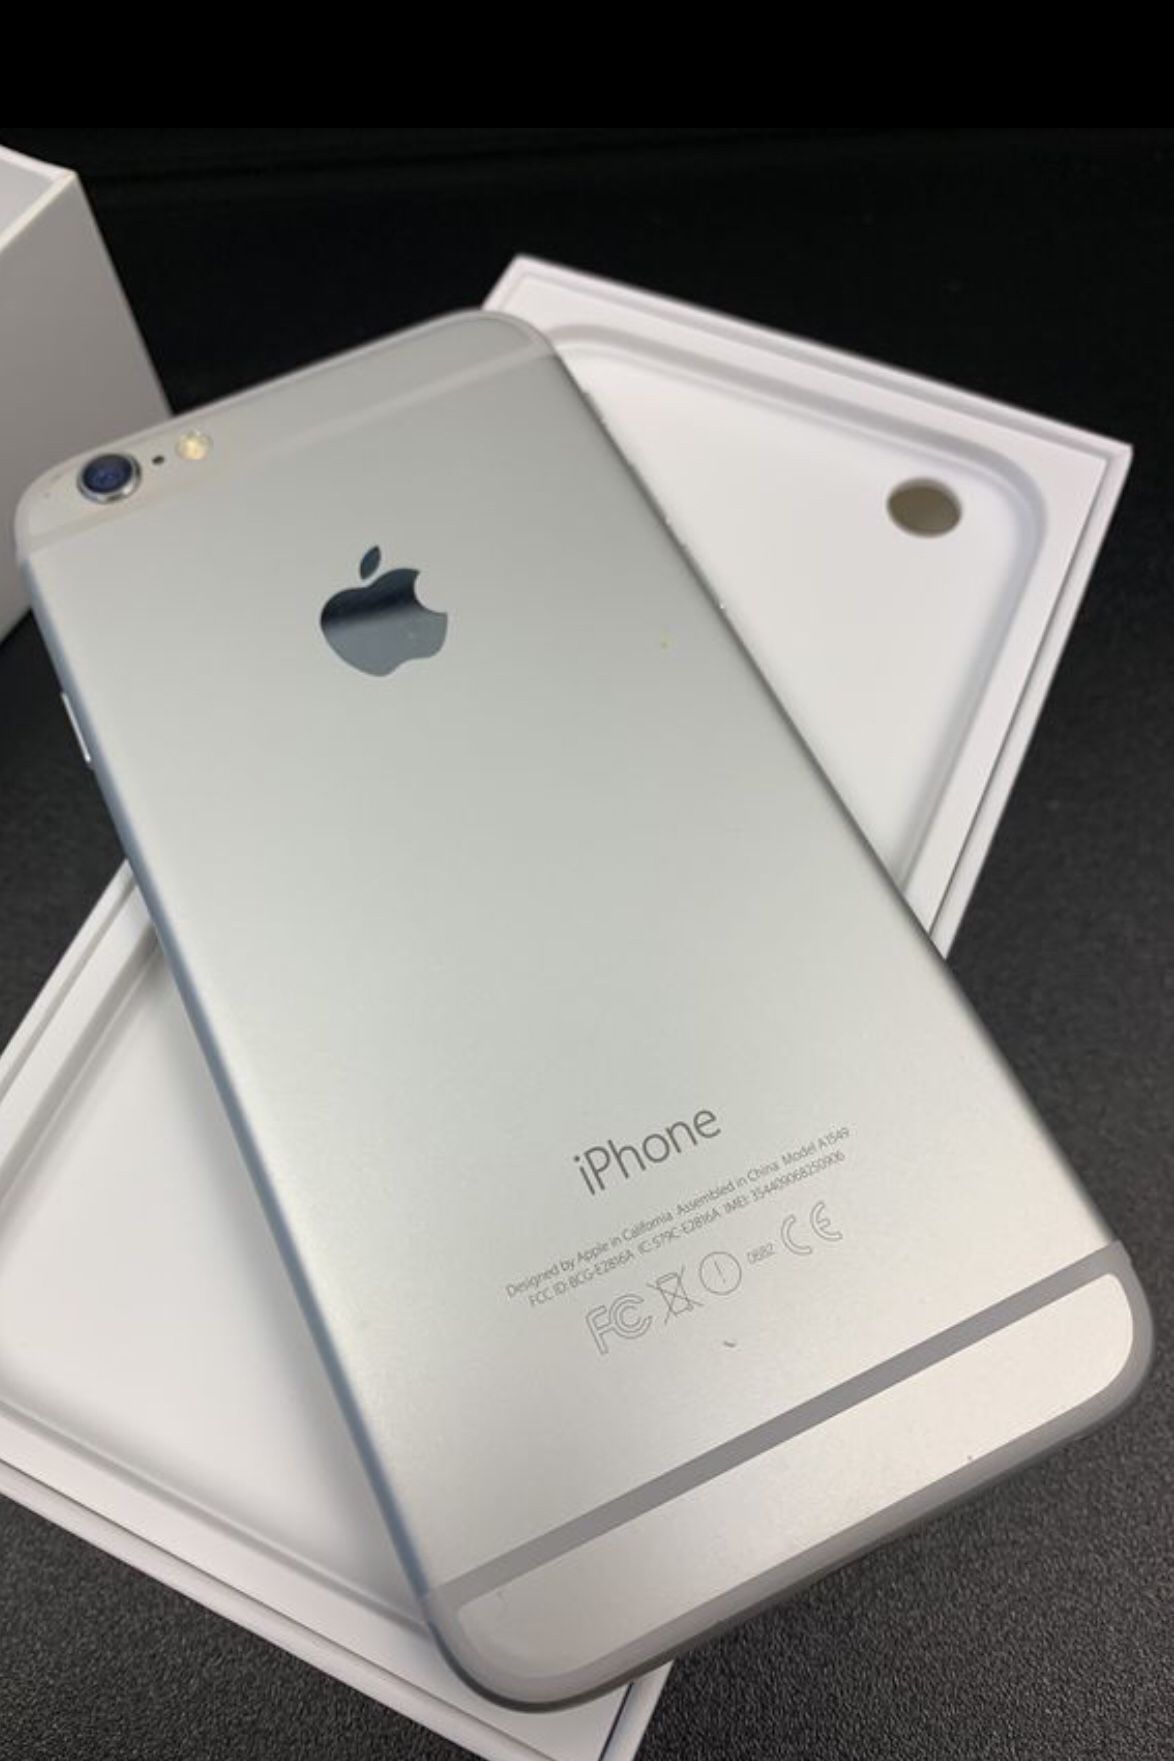 iPhone 6 Plus (16GB , 64GB , 128GB ) Unlocked For warranty | All colors Available|| Fully Functional( With Finger print )